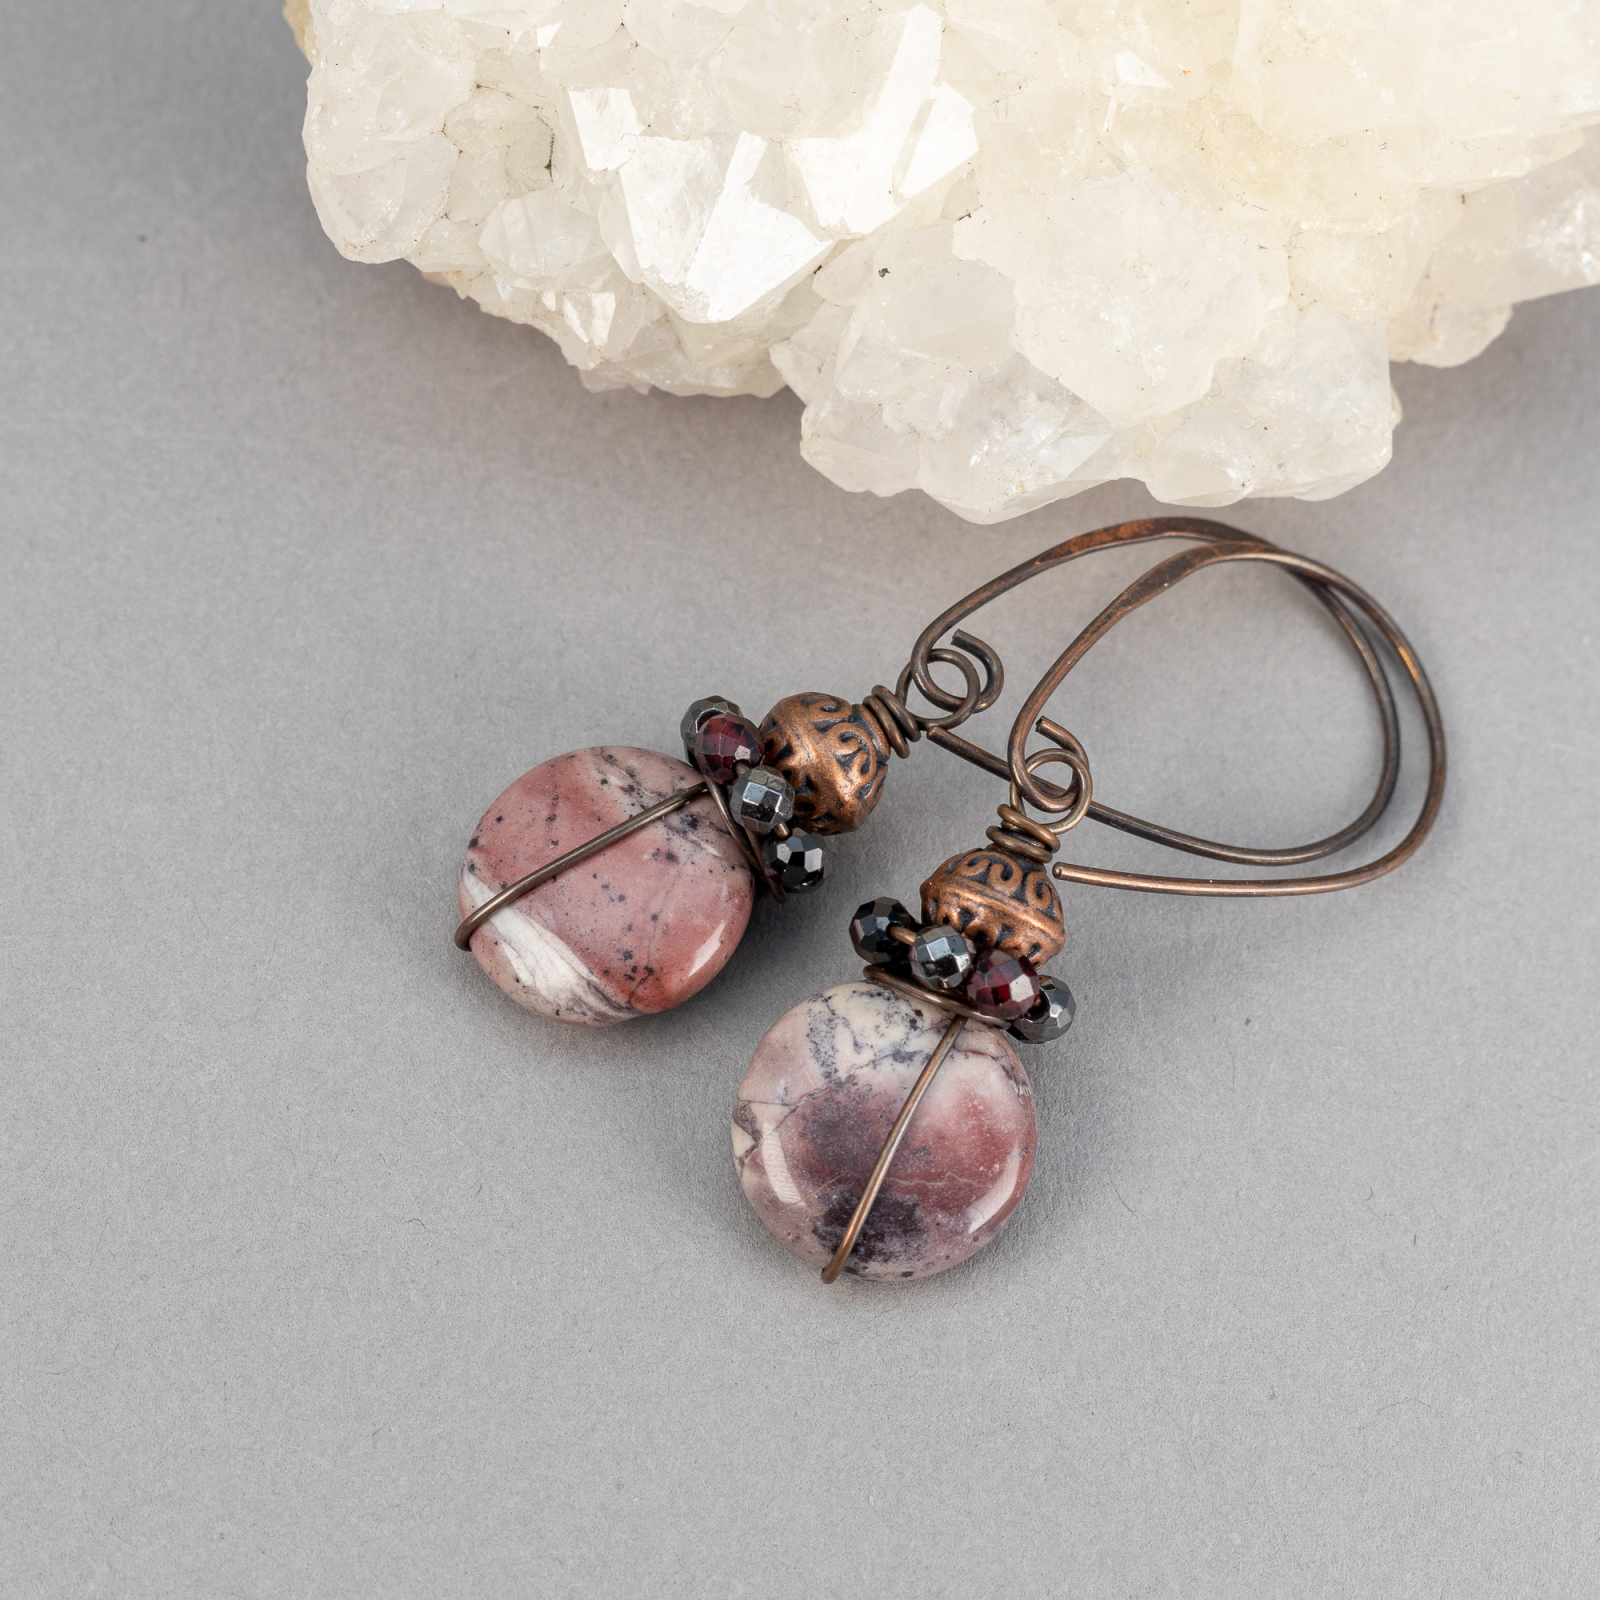 Jasper Earrings in Burgundy and Gray Colors, Copper Wire Wrapped Natural Gemstone  Earrings | Pebbles at my Feet